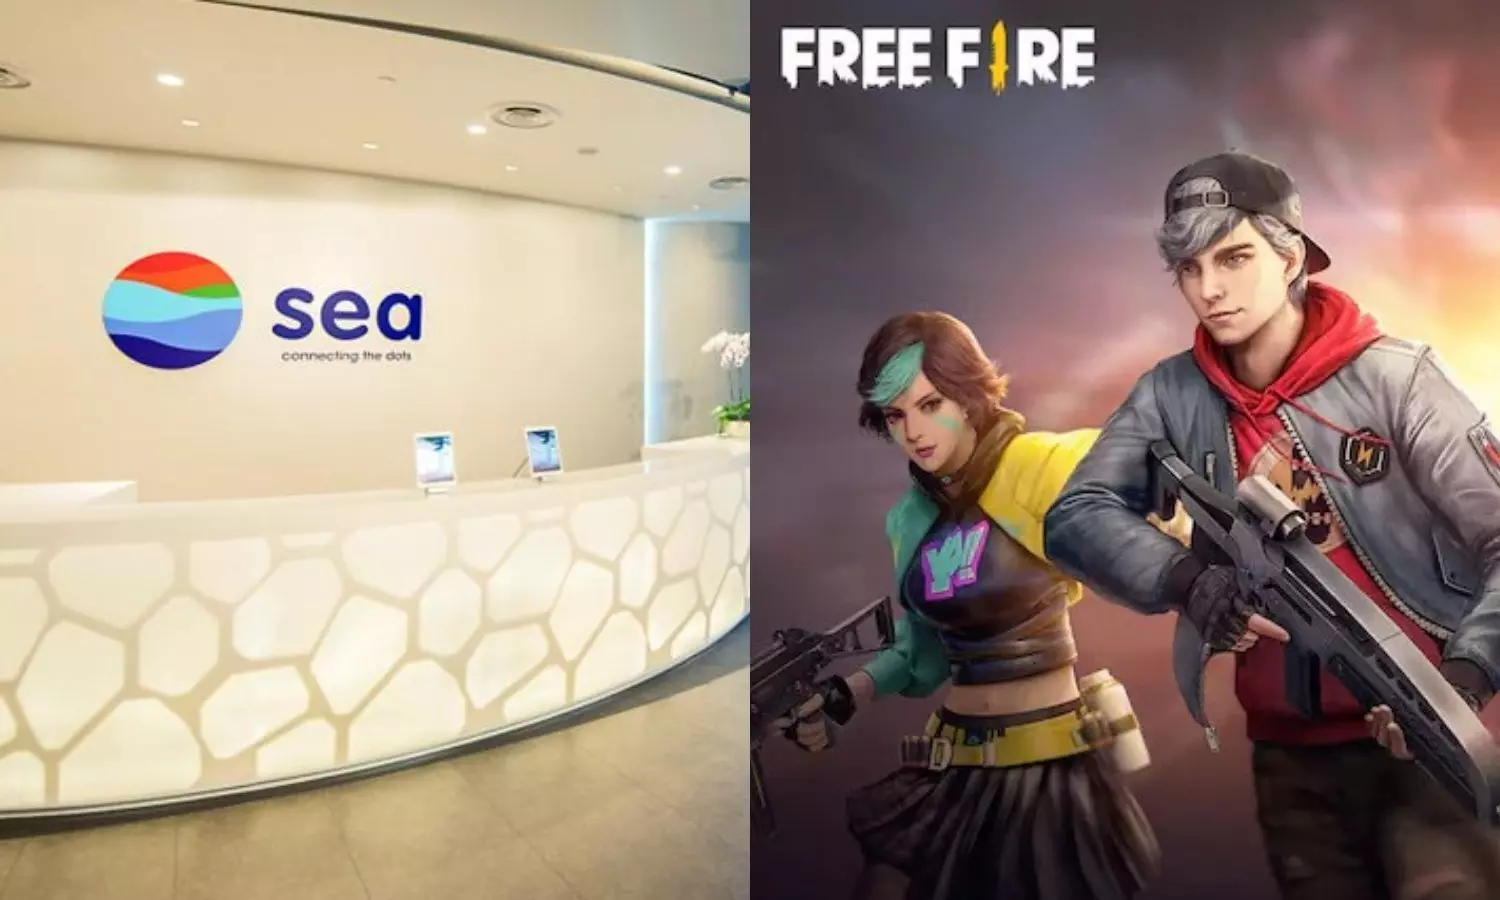 Garena Free Fire is by a Singapore company, so why it has been banned along  with Chinese apps